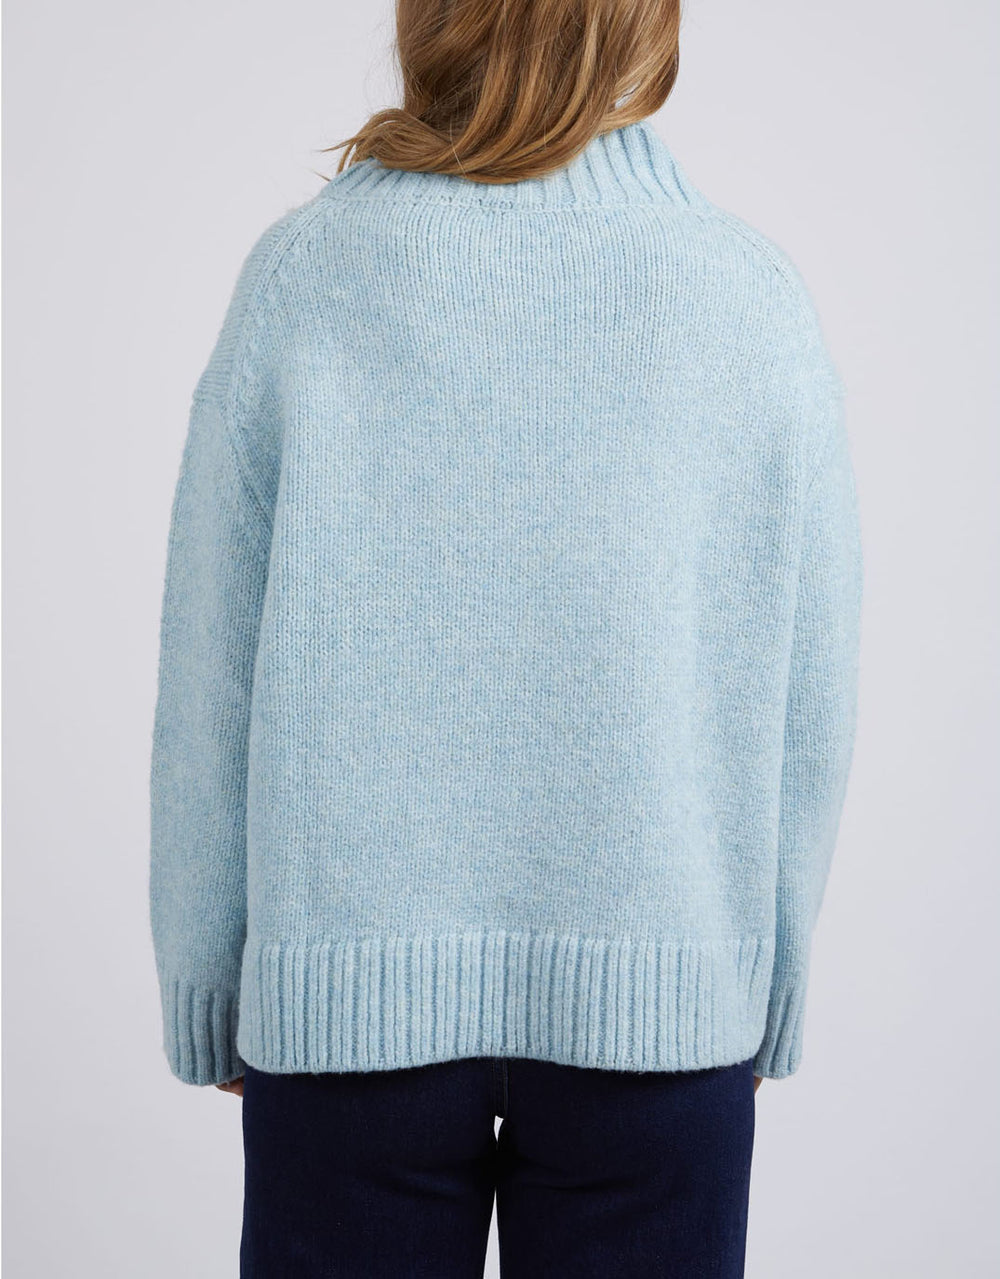 foxwood-pepper-knit-pale-blue-womens-clothing